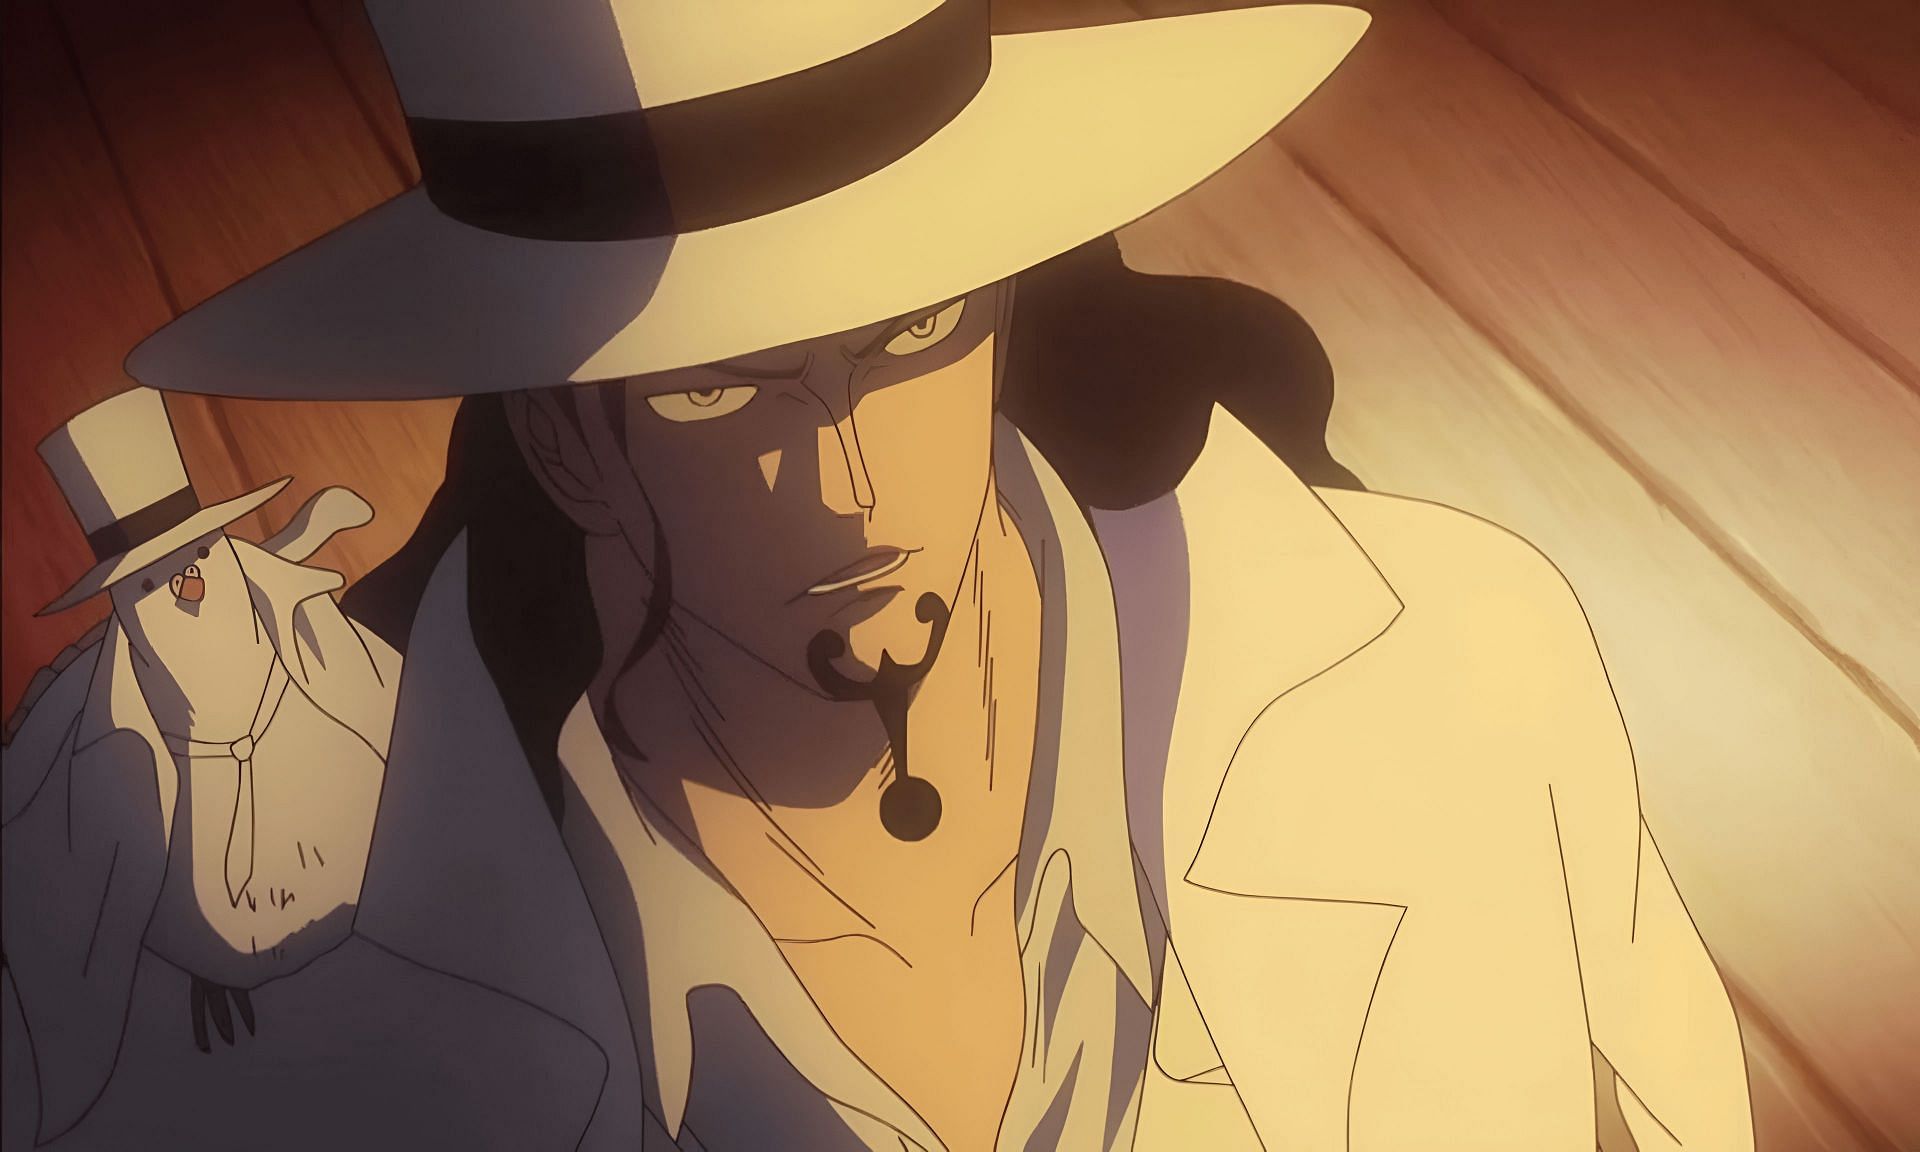 Lucci as seen in the anime (Image via Toei Animation)